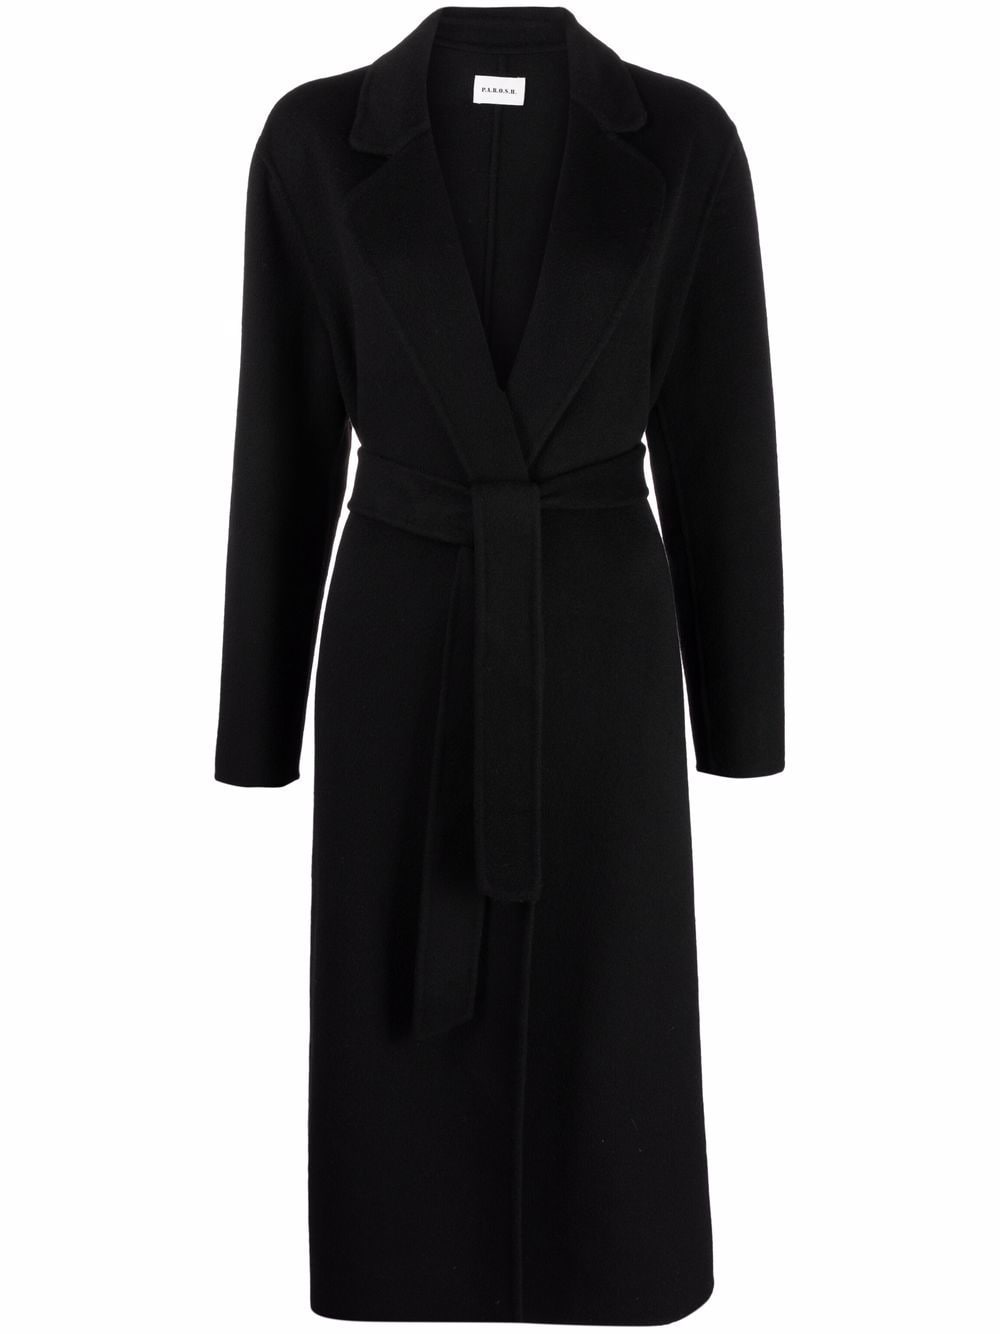 P.A.R.O.S.H. Belted Wool Coat - Farfetch